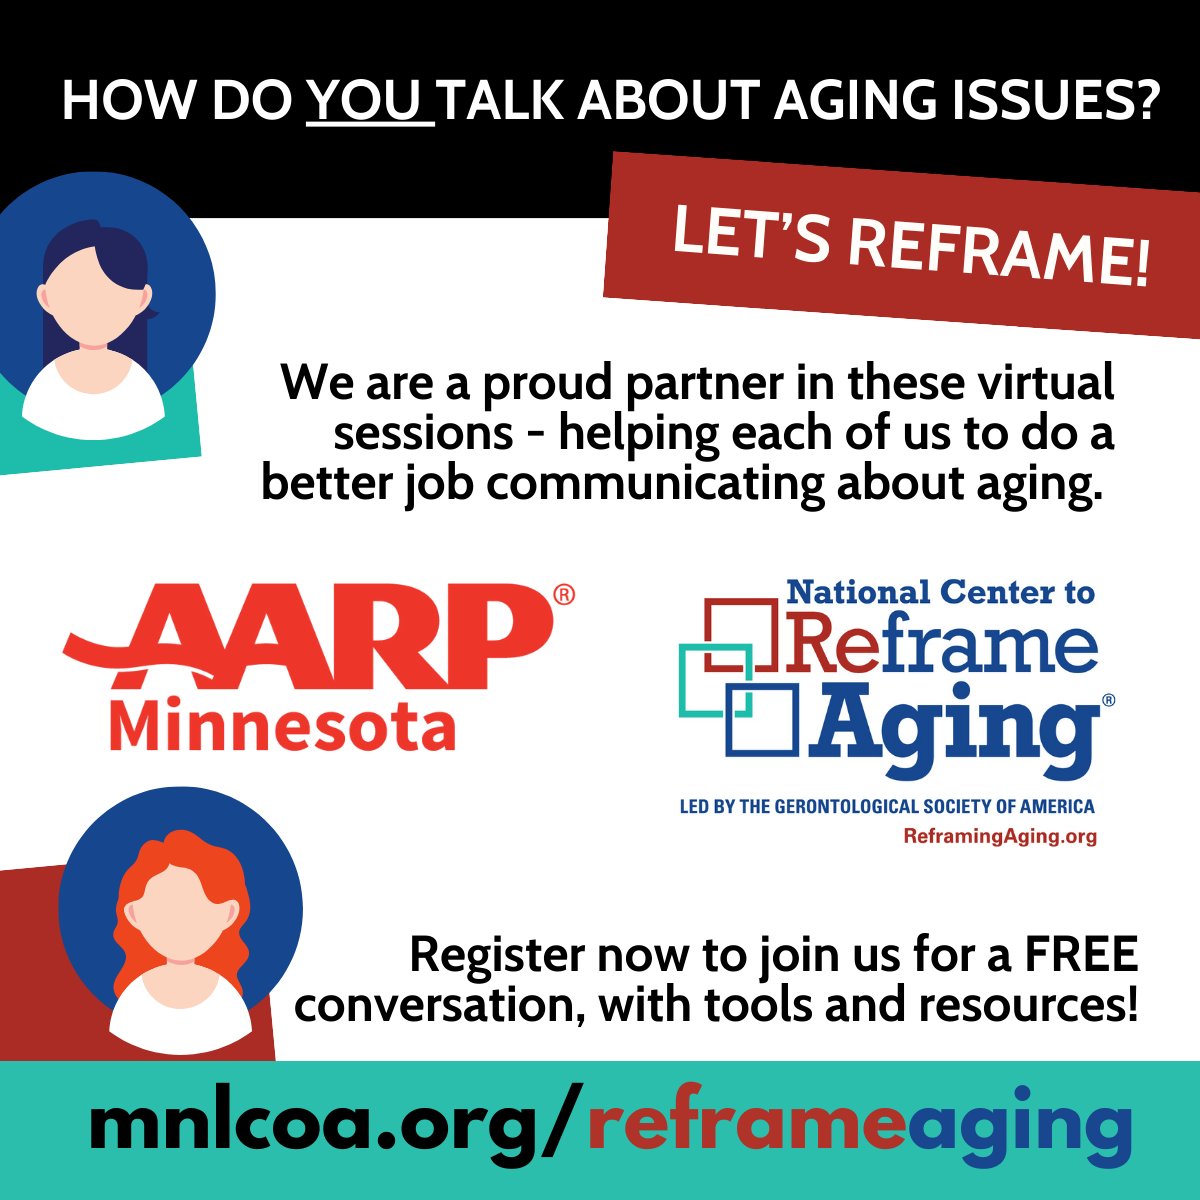 Join us, as we #ReframeAging and work towards #AgeFriendlyMN communities. Register today and help unite our aging sector ➡️ mnlcoa.org/reframeaging @mnlcoaging @UMNCHAI @ReframeingAging